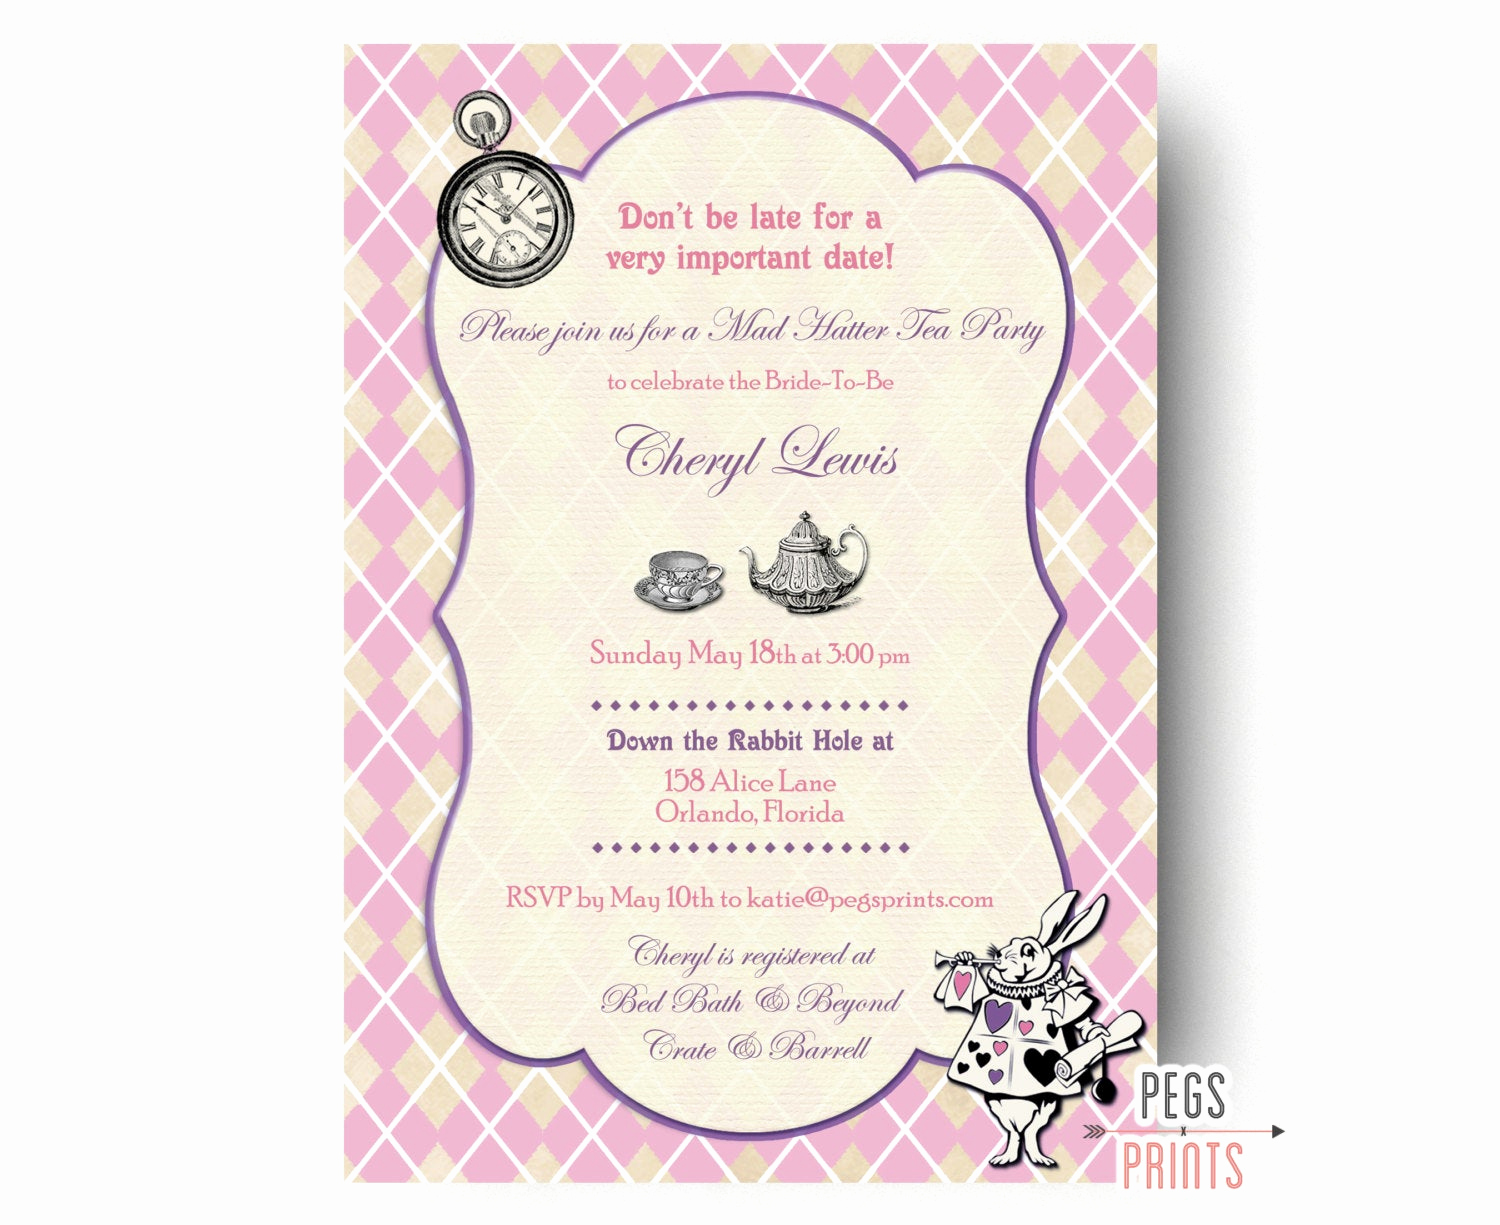 Mad Hatter Tea Party Invitation New Mad Hatter Bridal Shower Invitation Mad Hatter Tea Party